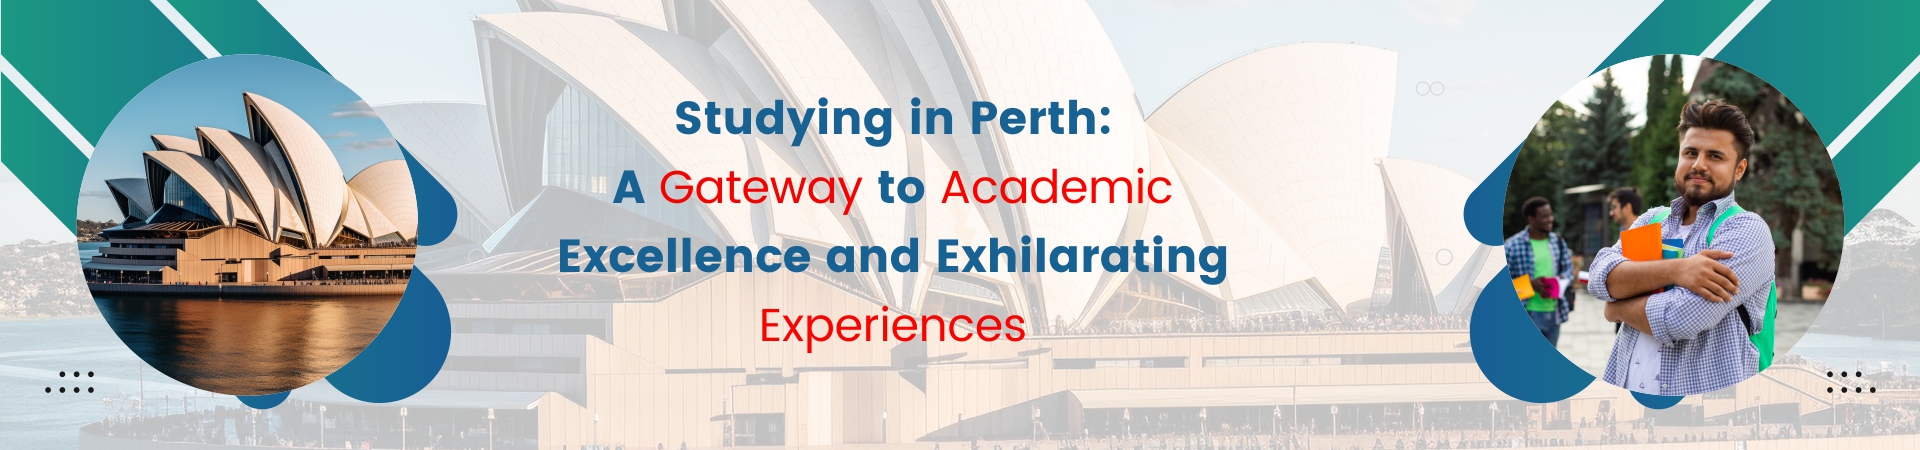 Studying in Perth: A Gateway to Academic Excellence and Exhilarating Experiences